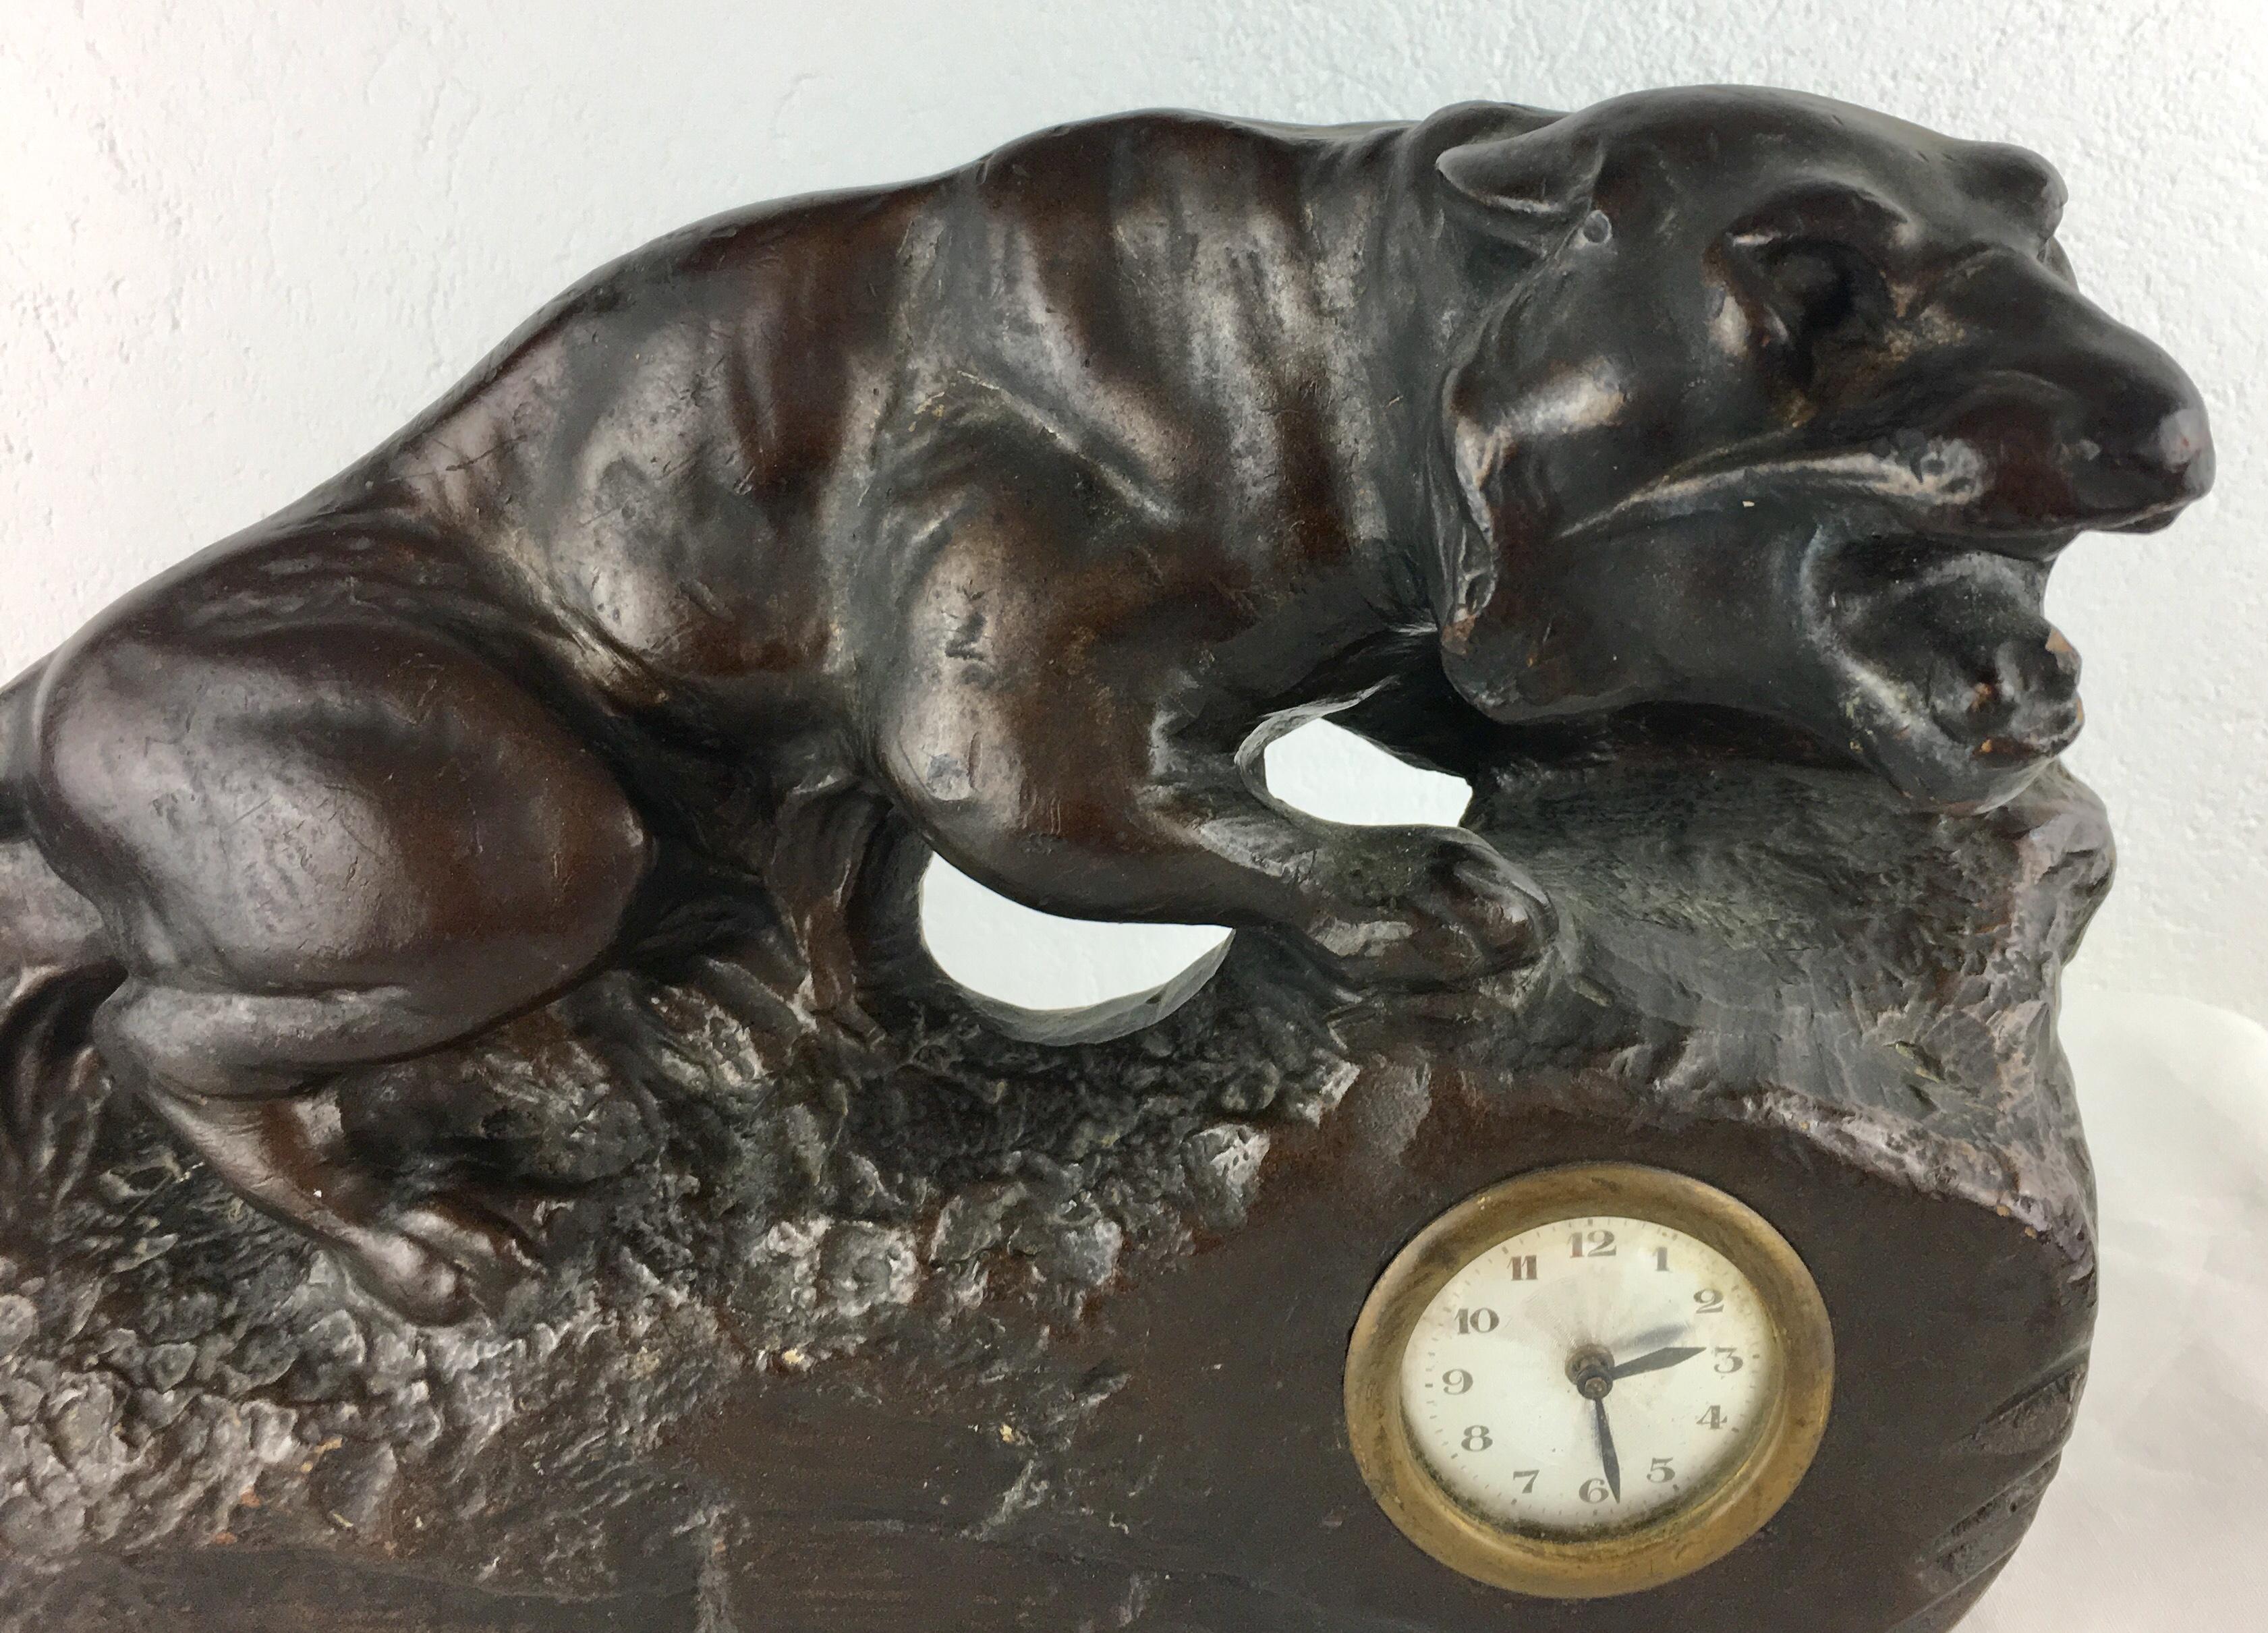 A beautiful French Art Deco enameled terracotta or possibly spelter panther sculpture and clock. Very good condition, circa 1930. Originates from the city of Nancy known for its Art Nouveau and Art Déco movement and styles, which was home to much of